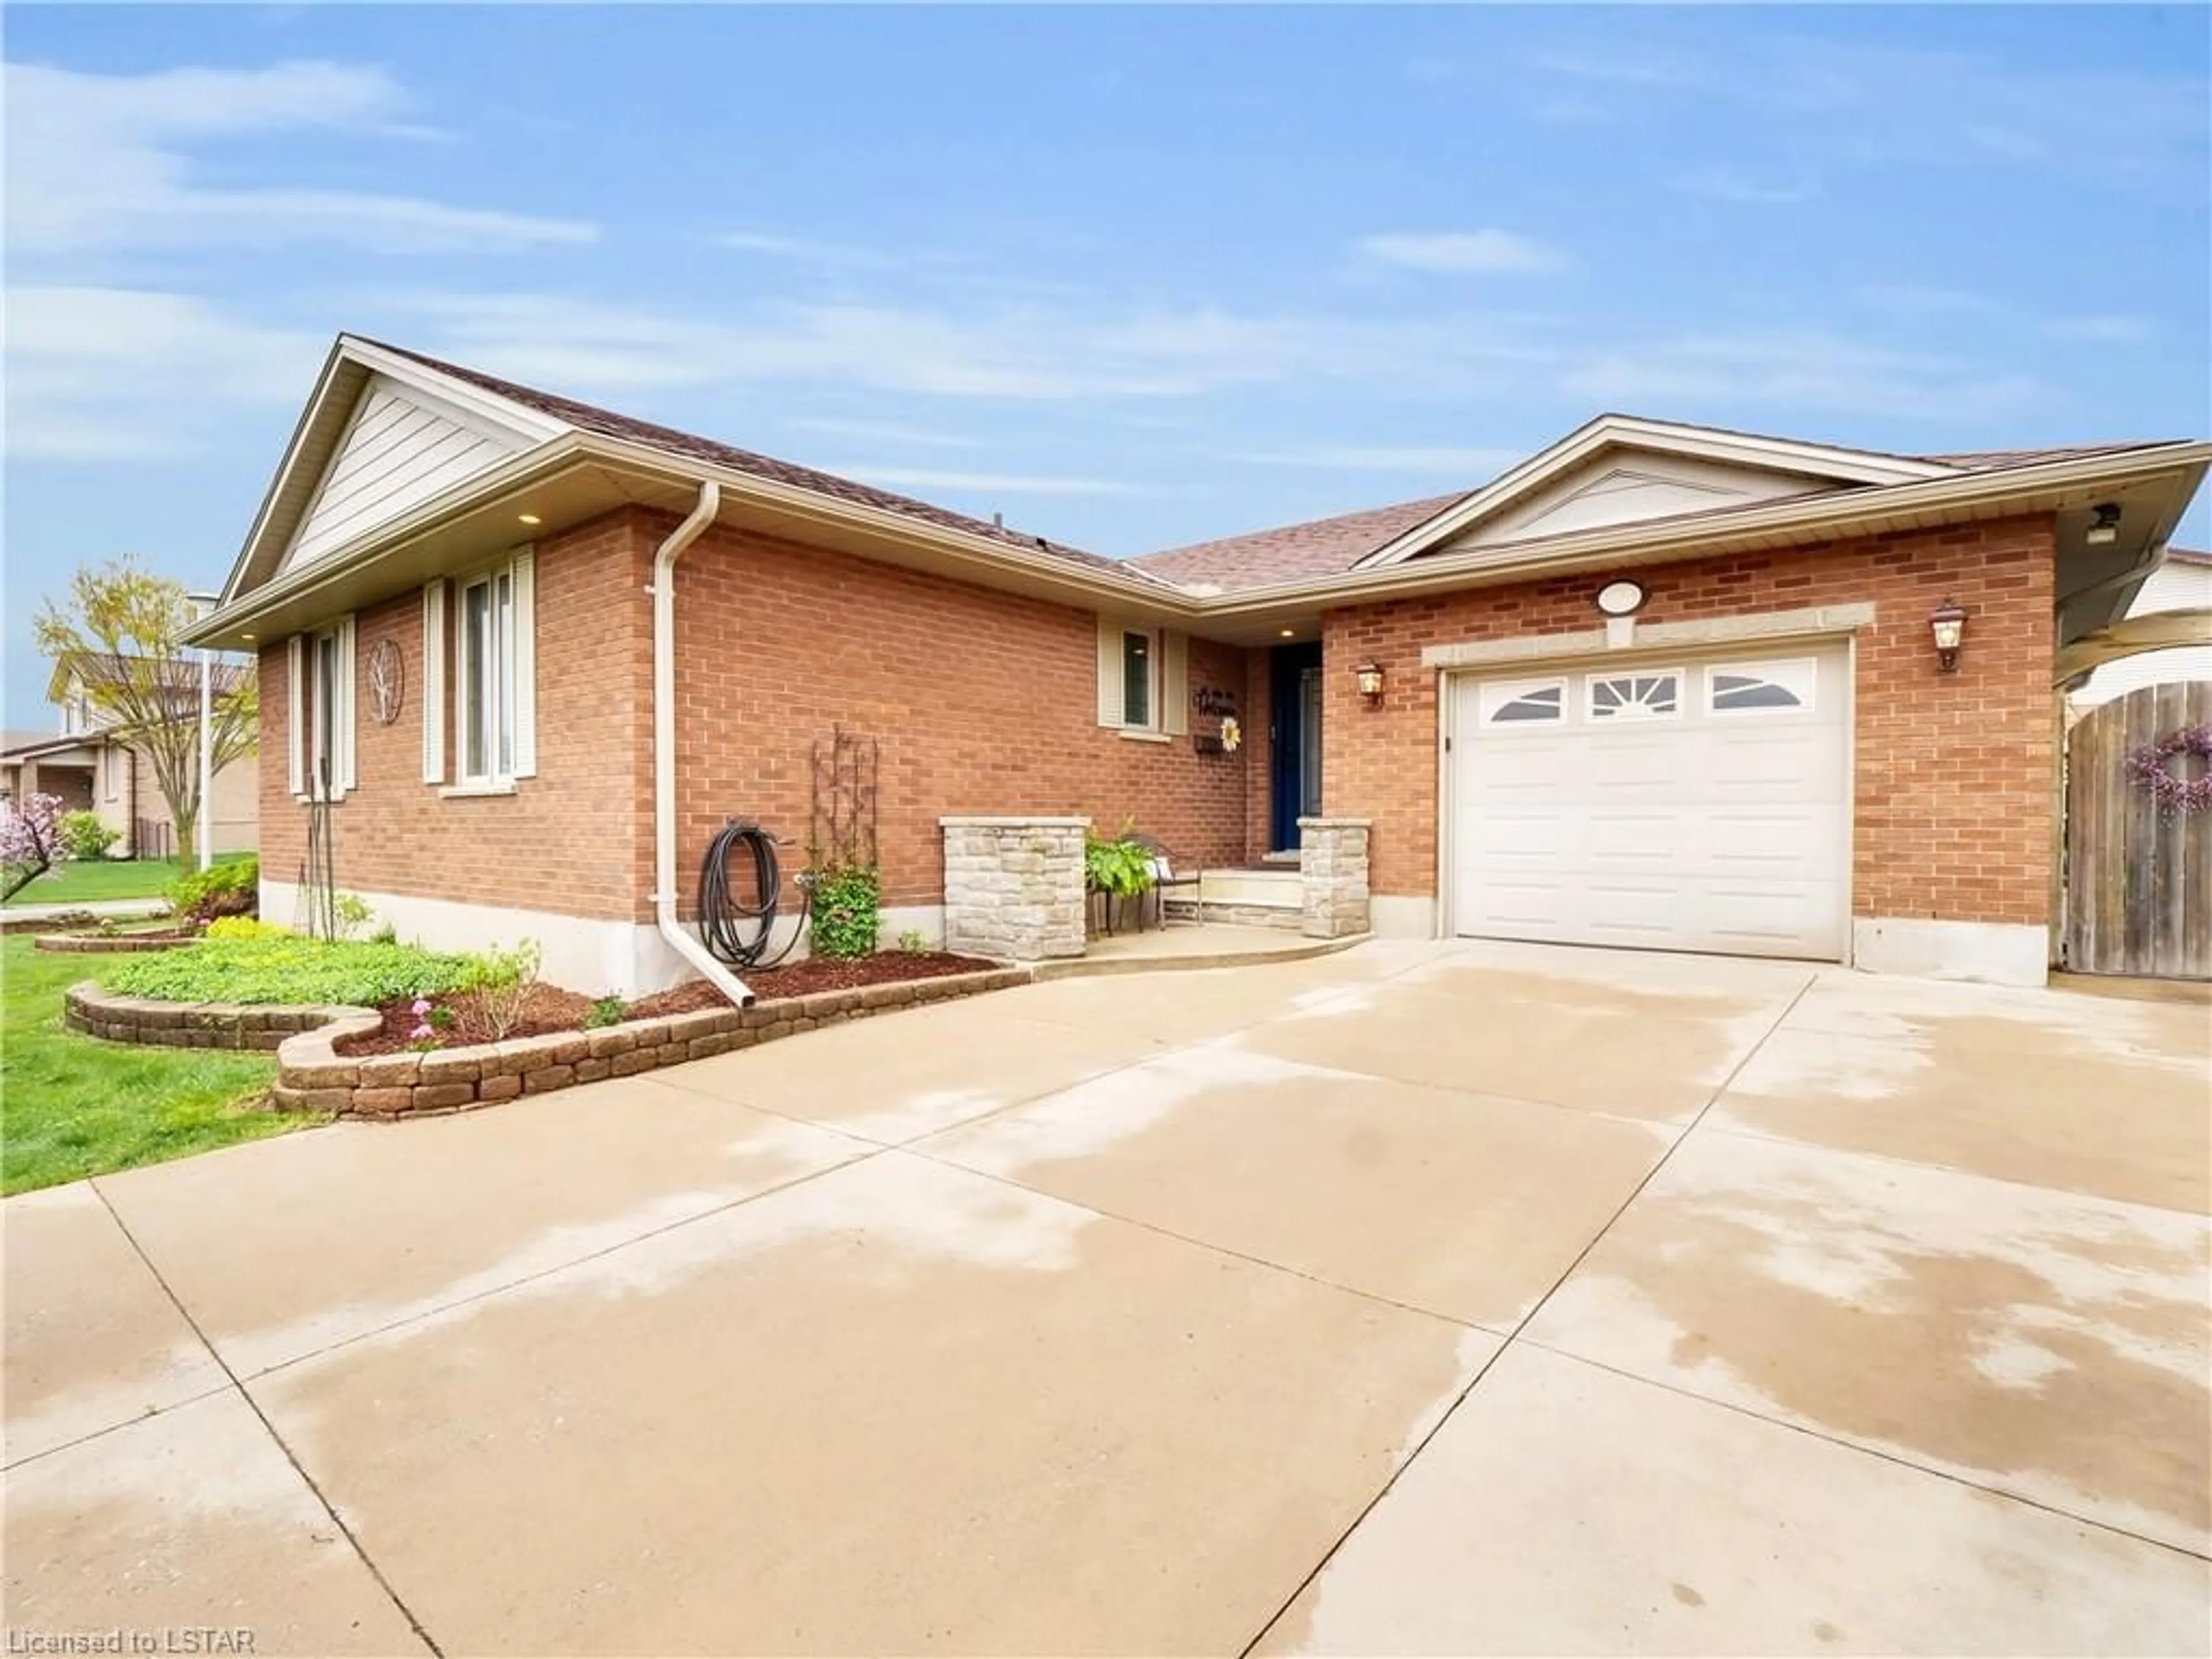 Home with brick exterior material for 358 Ferndale Ave, London Ontario N6C 5K7